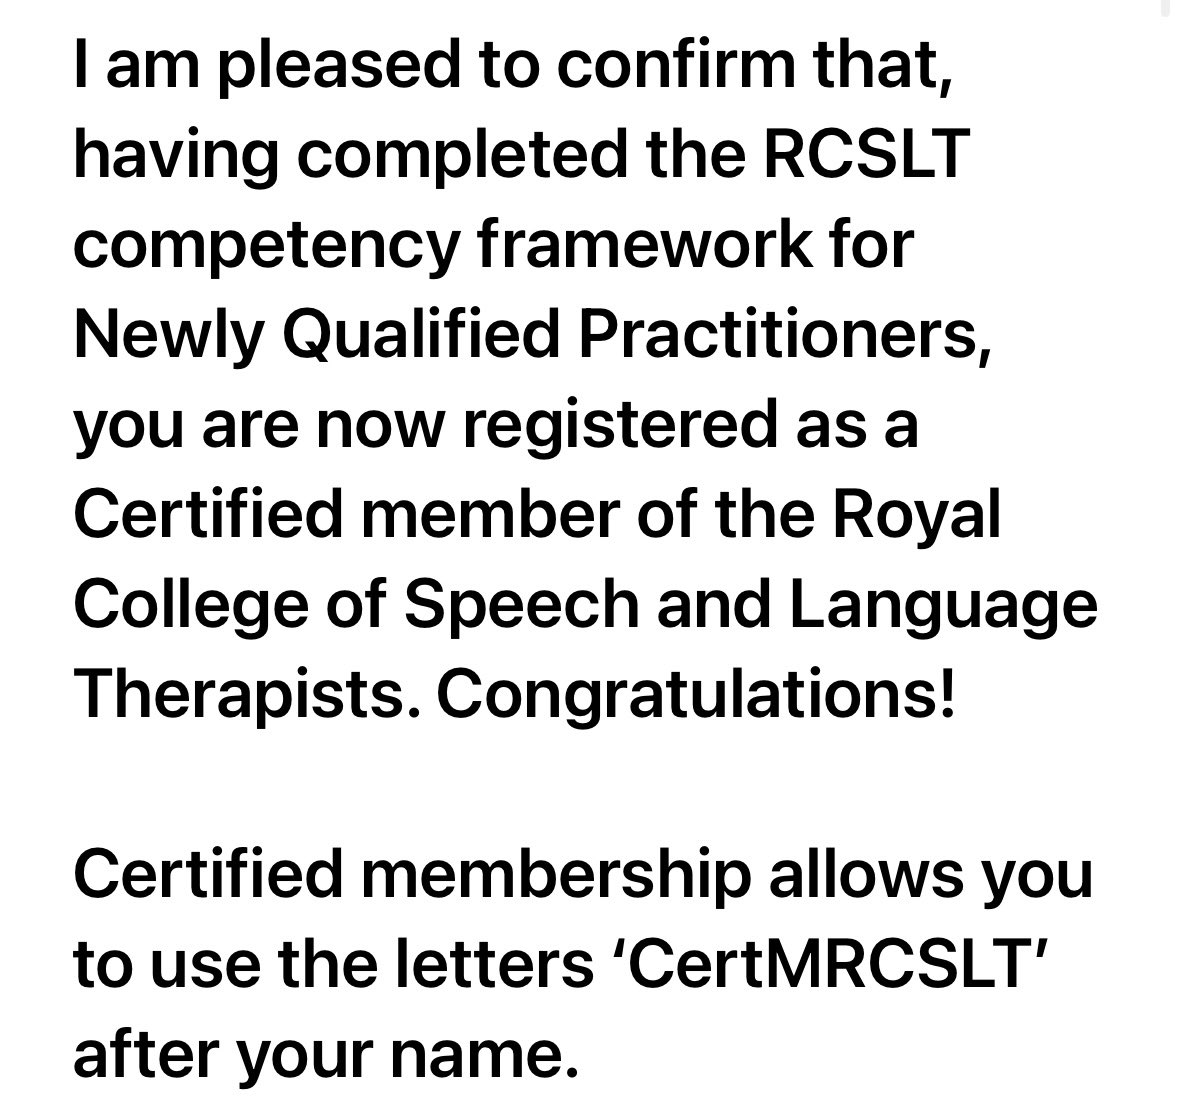 It’s official, I am no longer an NQP!! 😁😁 hard work and fabulous support pays off 7 months in and certified 👏🏻👏🏻 #RCSLT #MySLTday